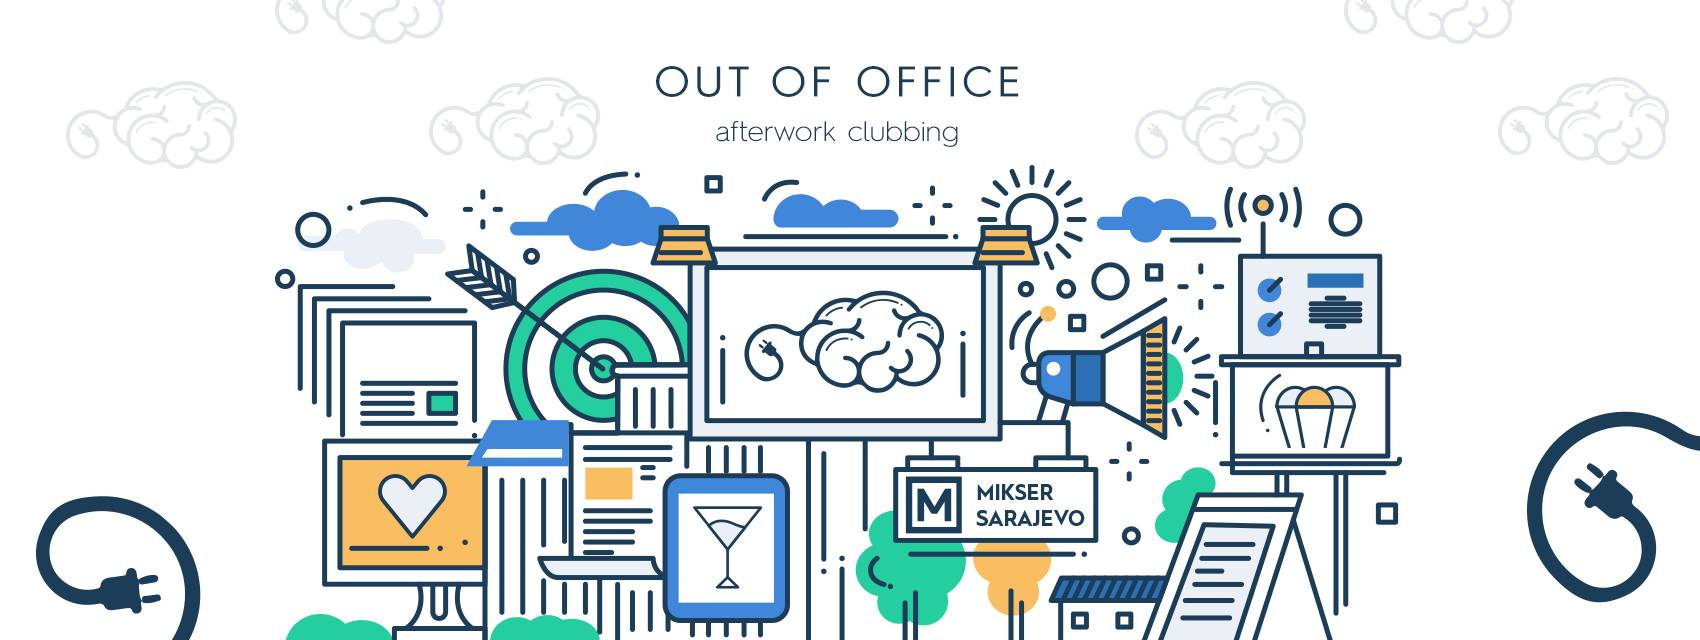 Out Of Office 29.12.2017. Mikser